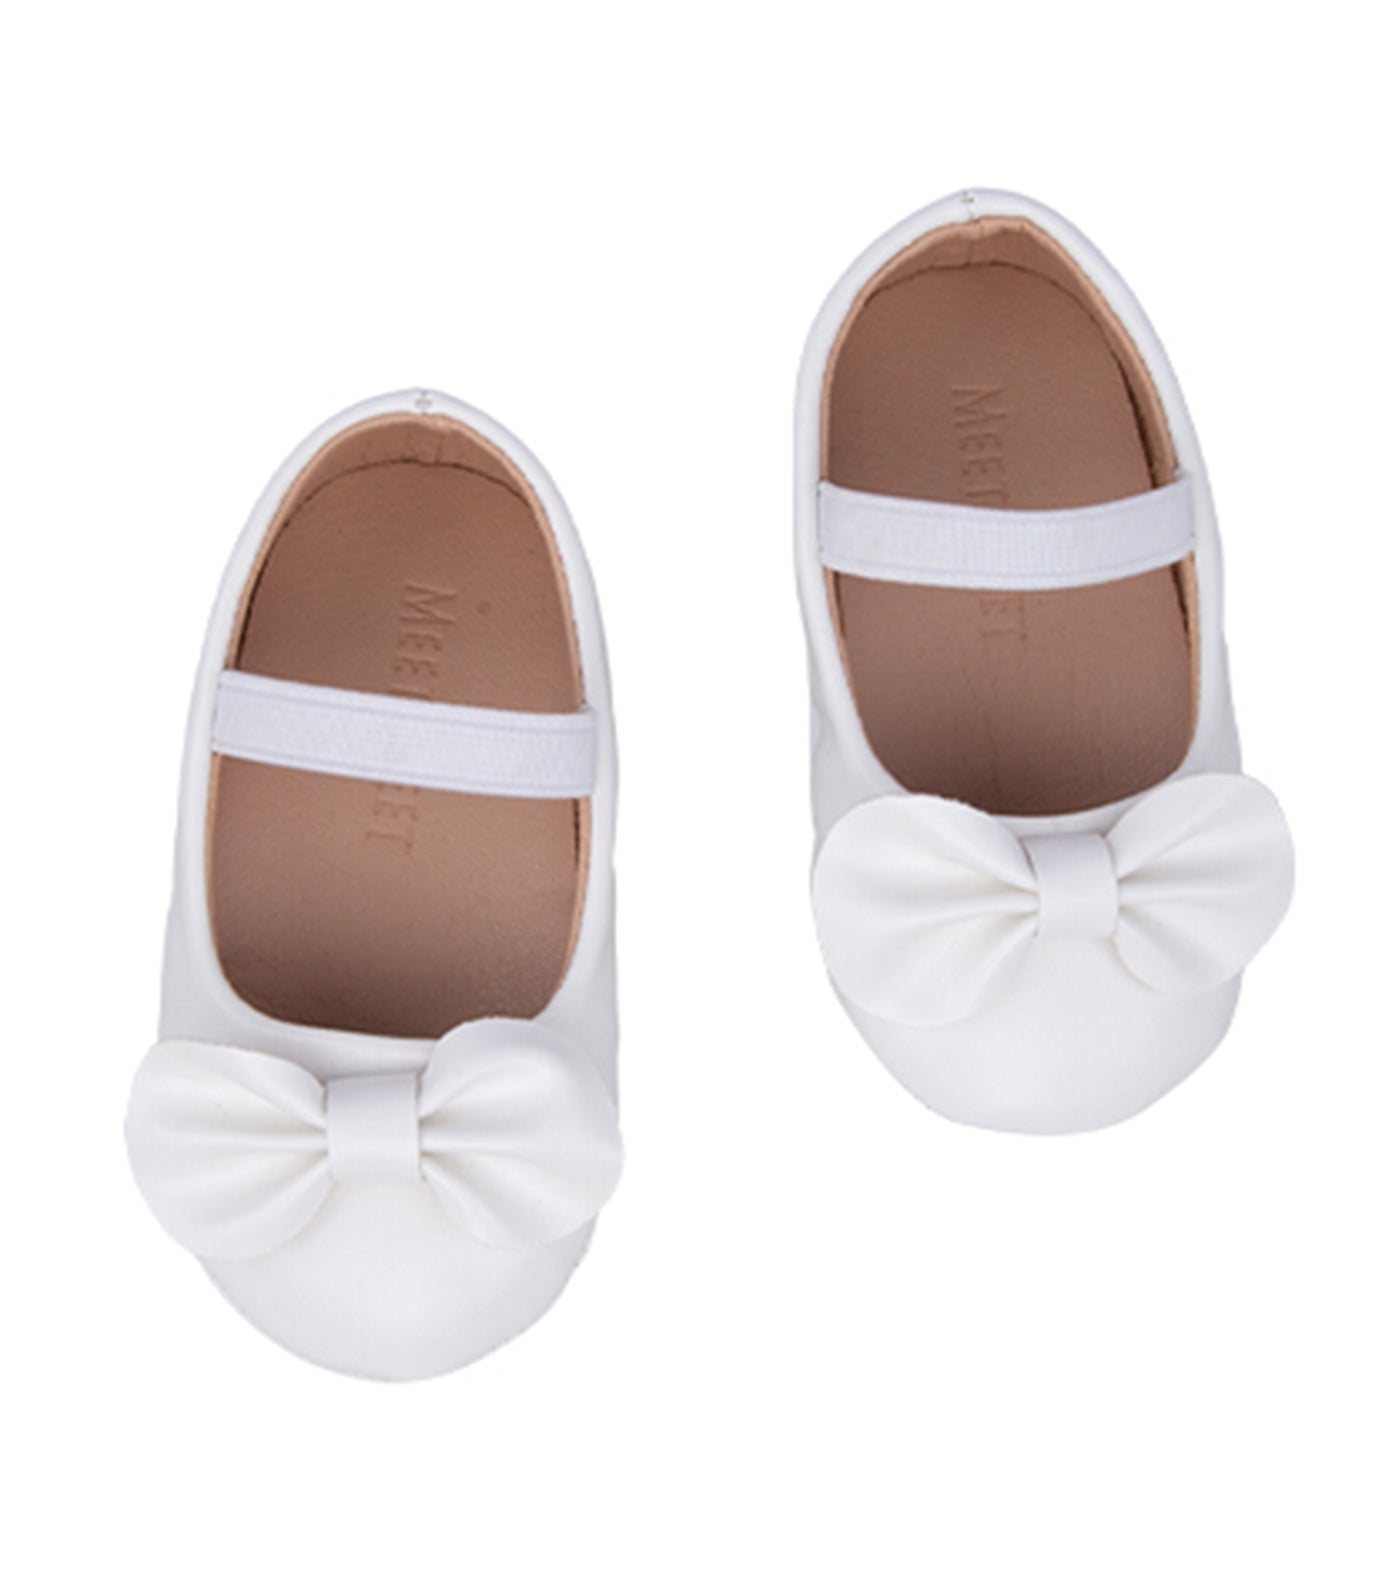 Bee 2 Mary Janes for Toddler Girls - White